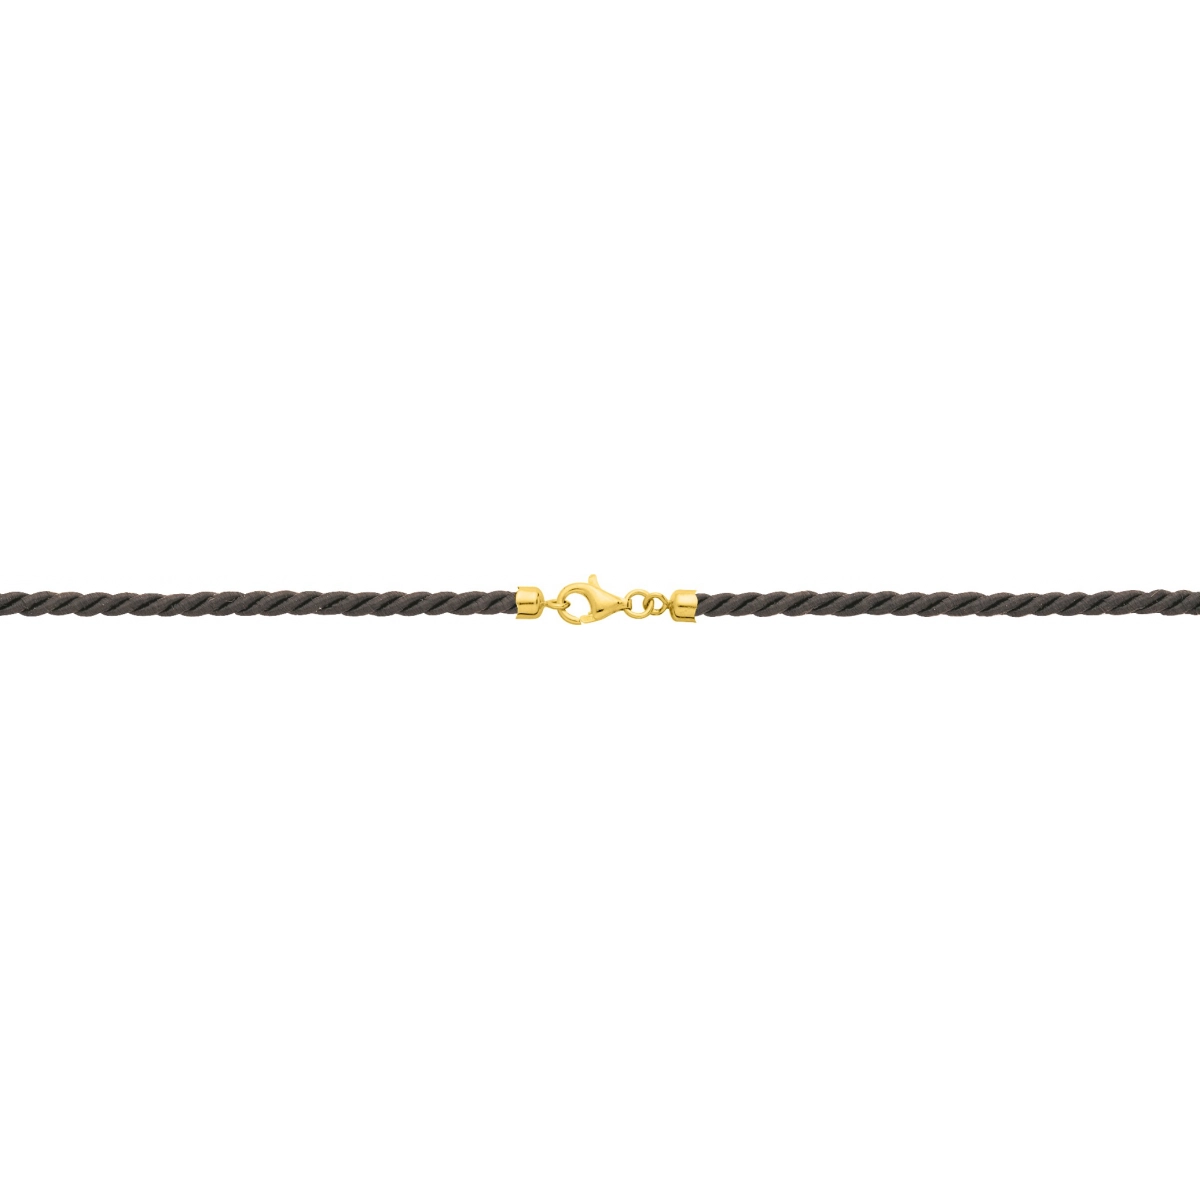 Necklace w. cord, clasp gold plated Brass - Size: 45  Lua Blanca  102040.45